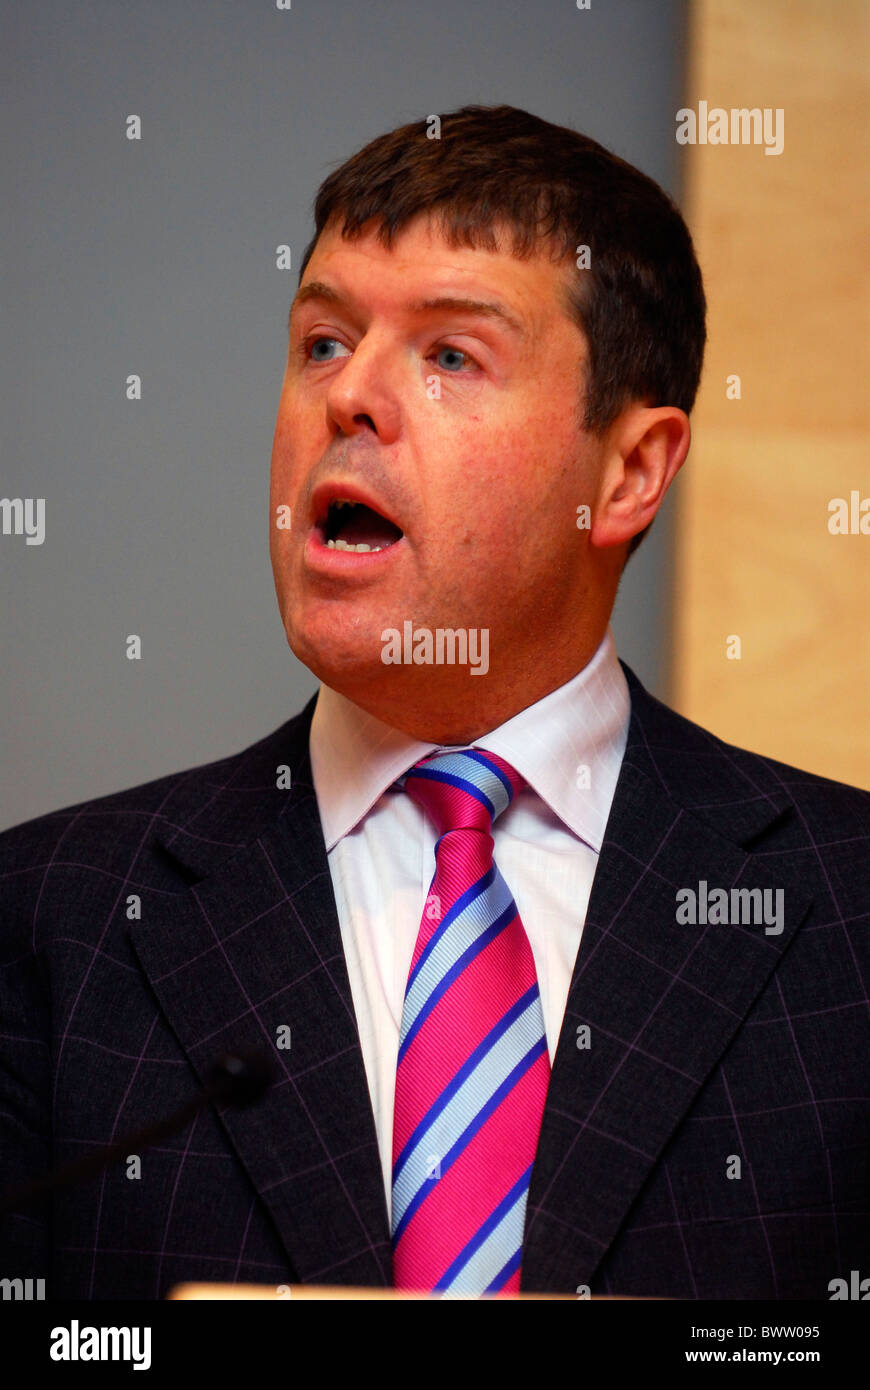 Paul Burstow MP, Minister of State, Department of Health, speaking at a conference for carers, November 2010, London, UK. Stock Photo